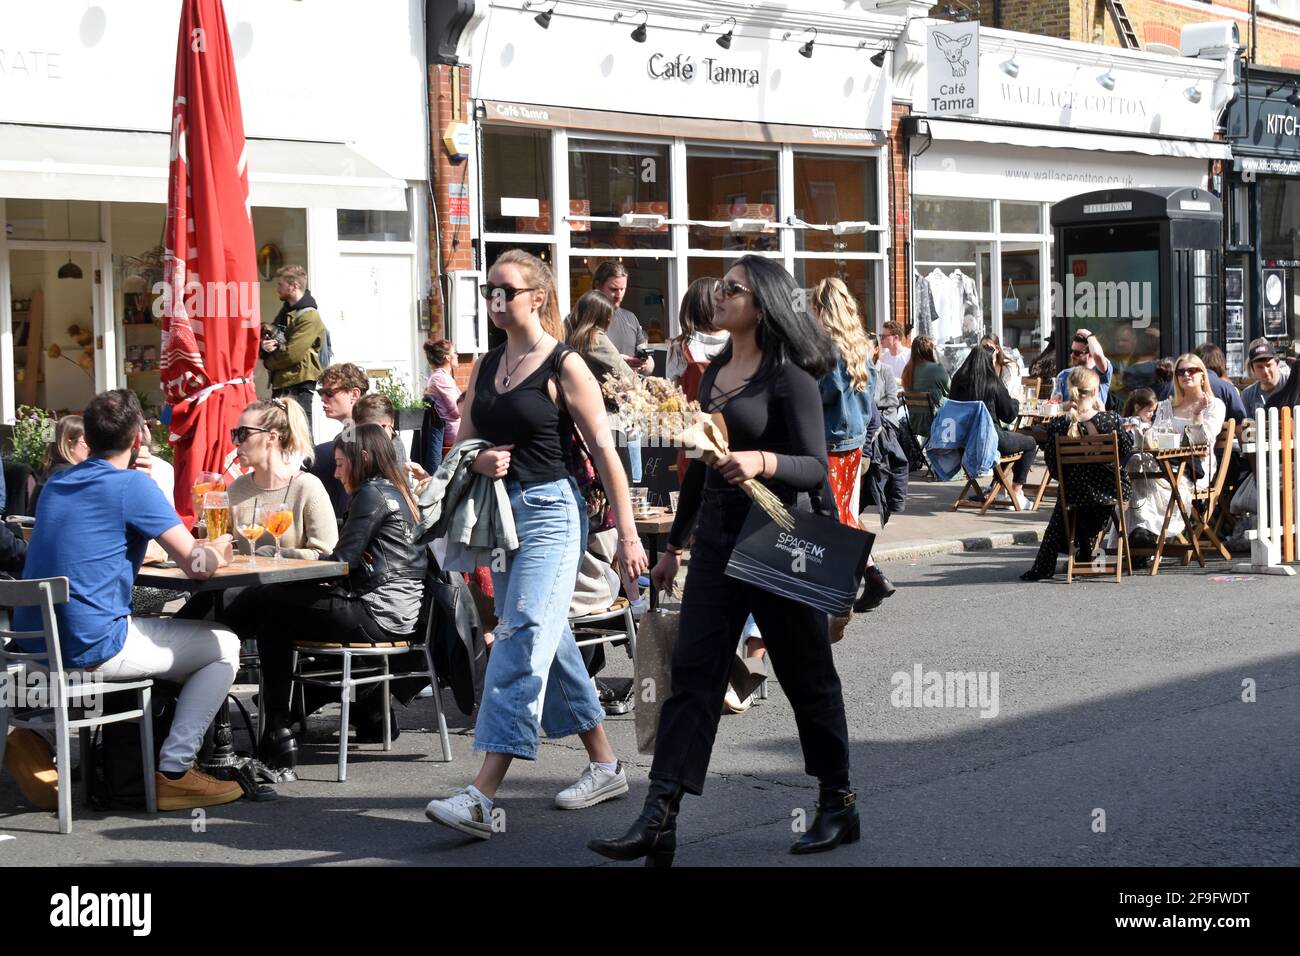 London, UK. 18th Apr, 2021. Northcote road pedestrianised to allow businesses to recover after lockdown. Sunshine on Sunday as pubs and restaurants open to the crowds. Credit: JOHNNY ARMSTEAD/Alamy Live News Stock Photo